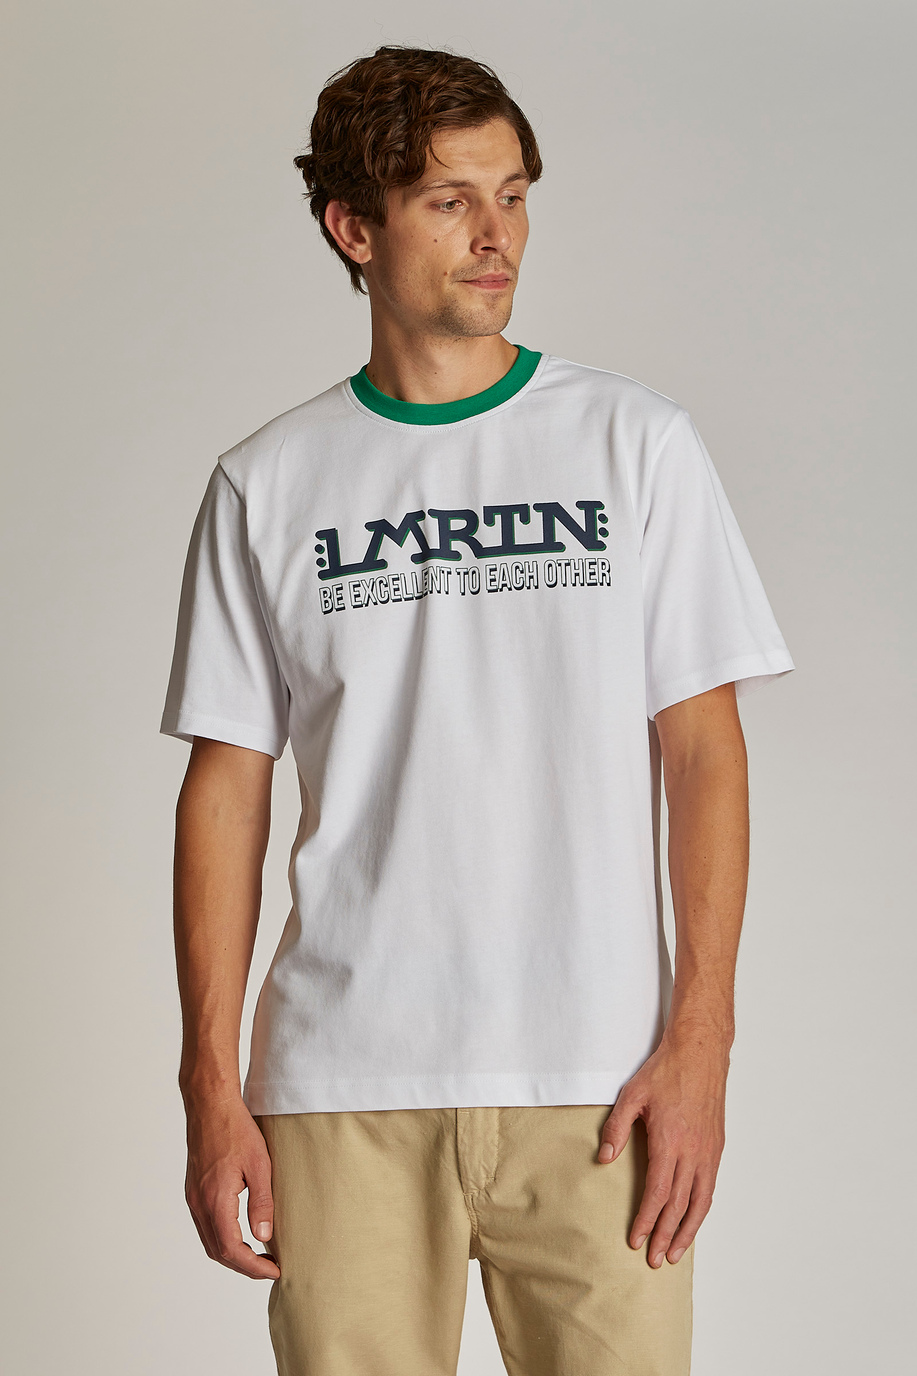 Men's oversized short-sleeved T-shirt featuring a contrasting collar - T-shirts | La Martina - Official Online Shop